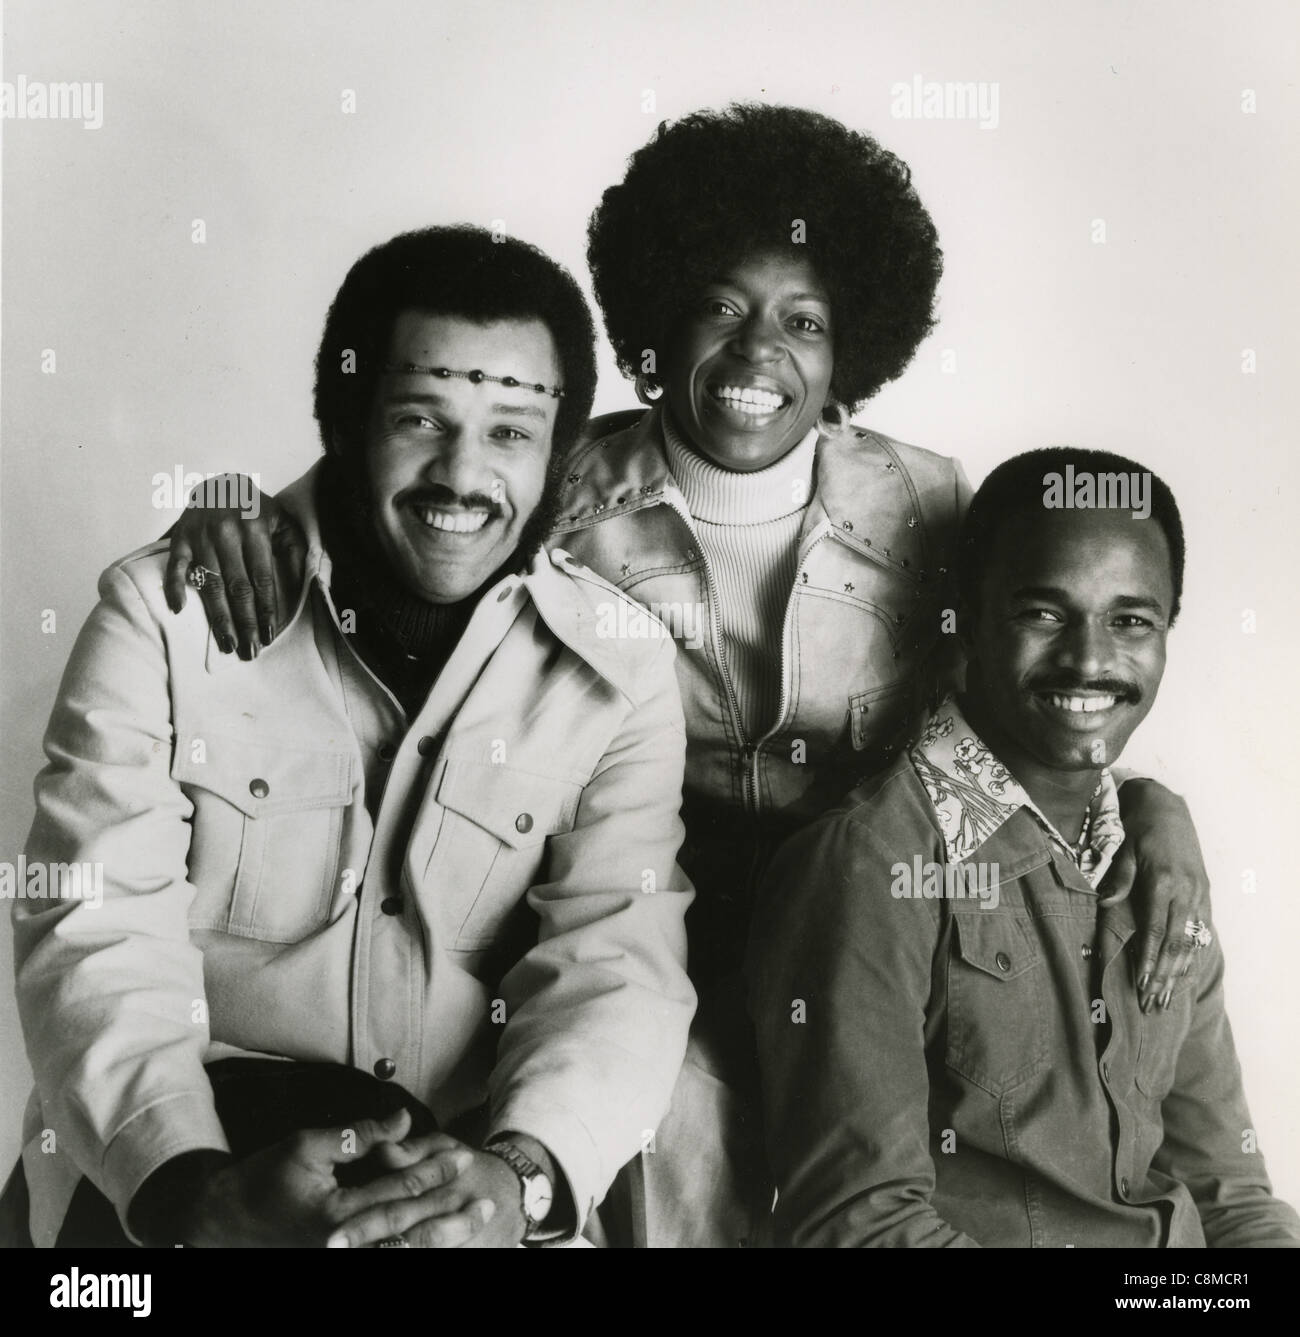 HUES CORPORATION  Promotional photo of US Soul group about 1974 Stock Photo